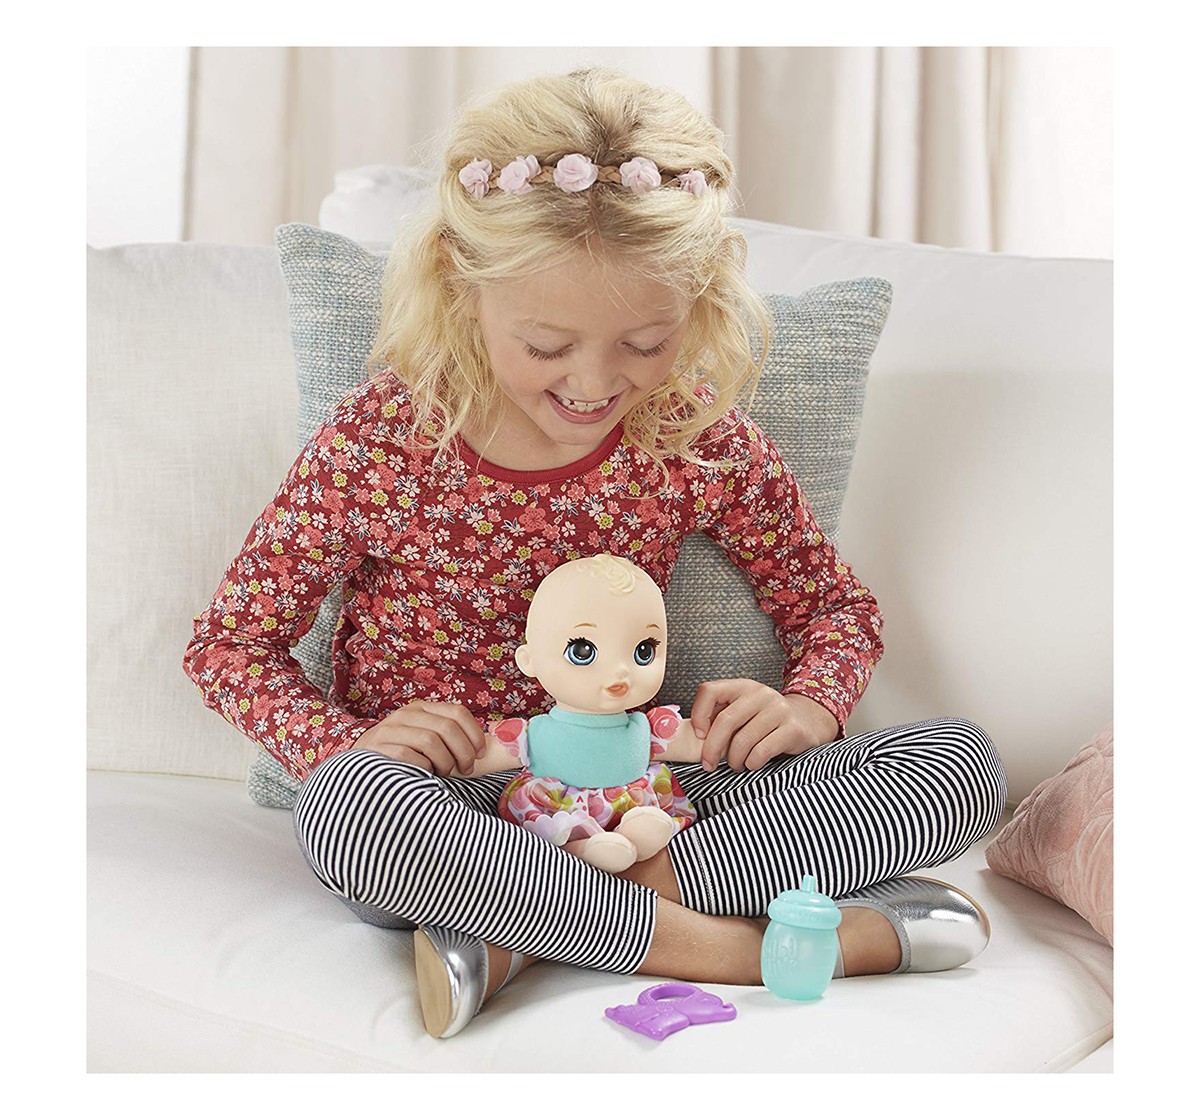 Baby Alive Lil' Slumbers Blonde Baby Doll Dolls & Accessories for age 3Y+ 